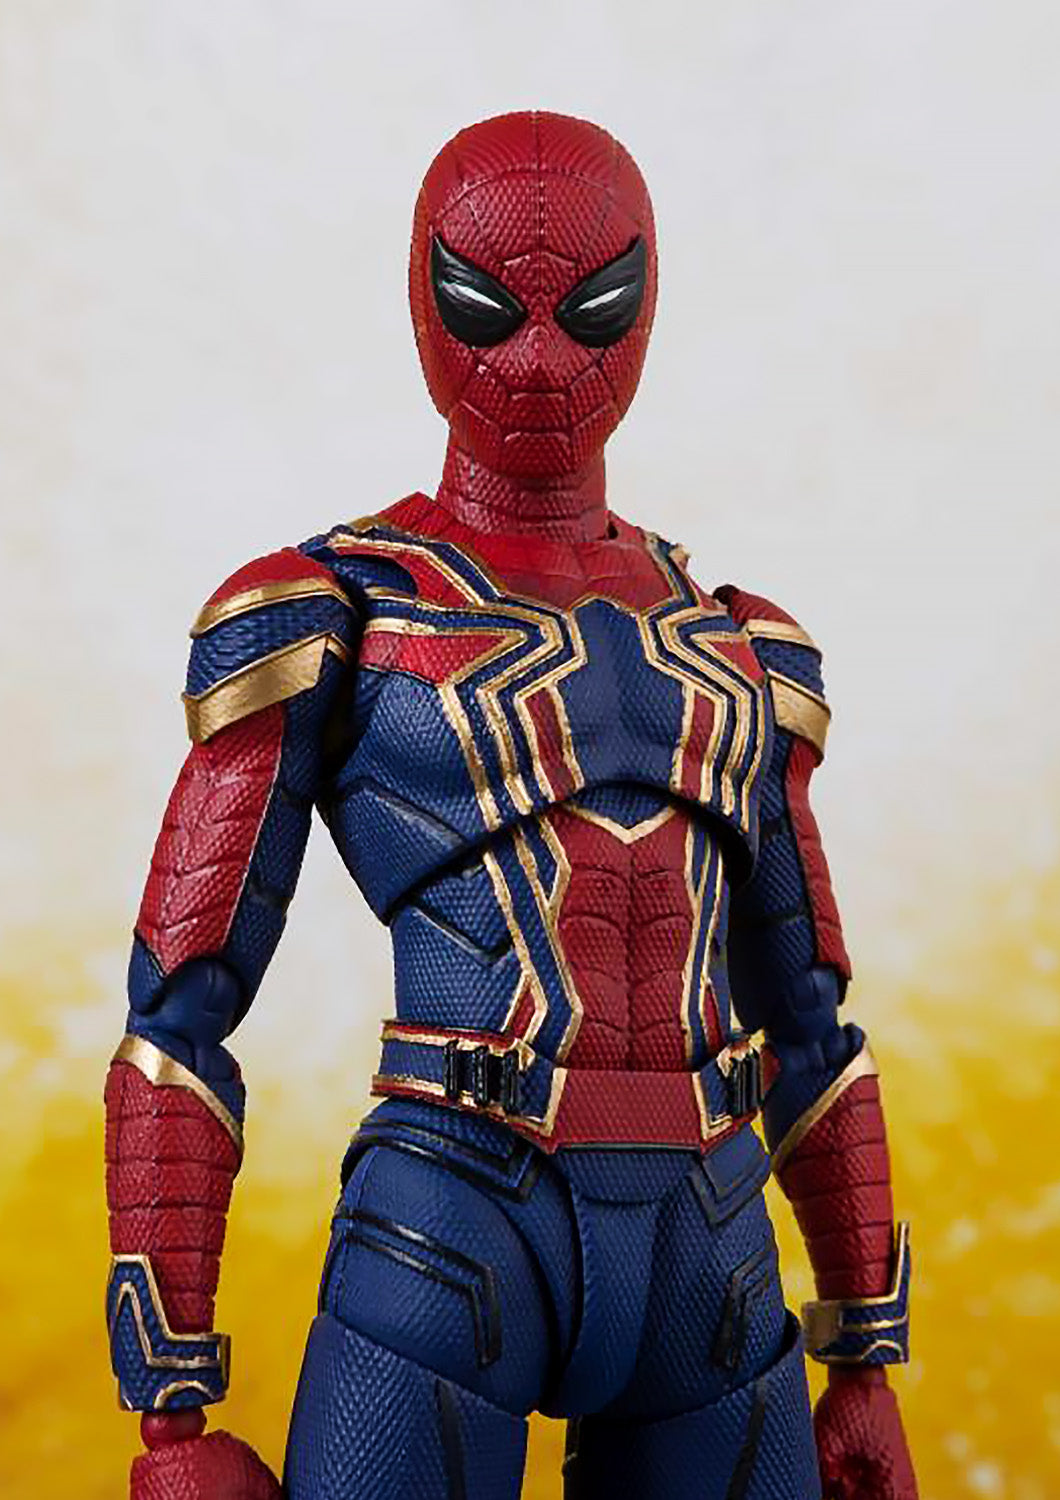 SH FIGUARTS AVENGERS INFINITY WAR IRON SPIDER & TAMASHII STAGE - SHF22582 - Anotoys Collectibles